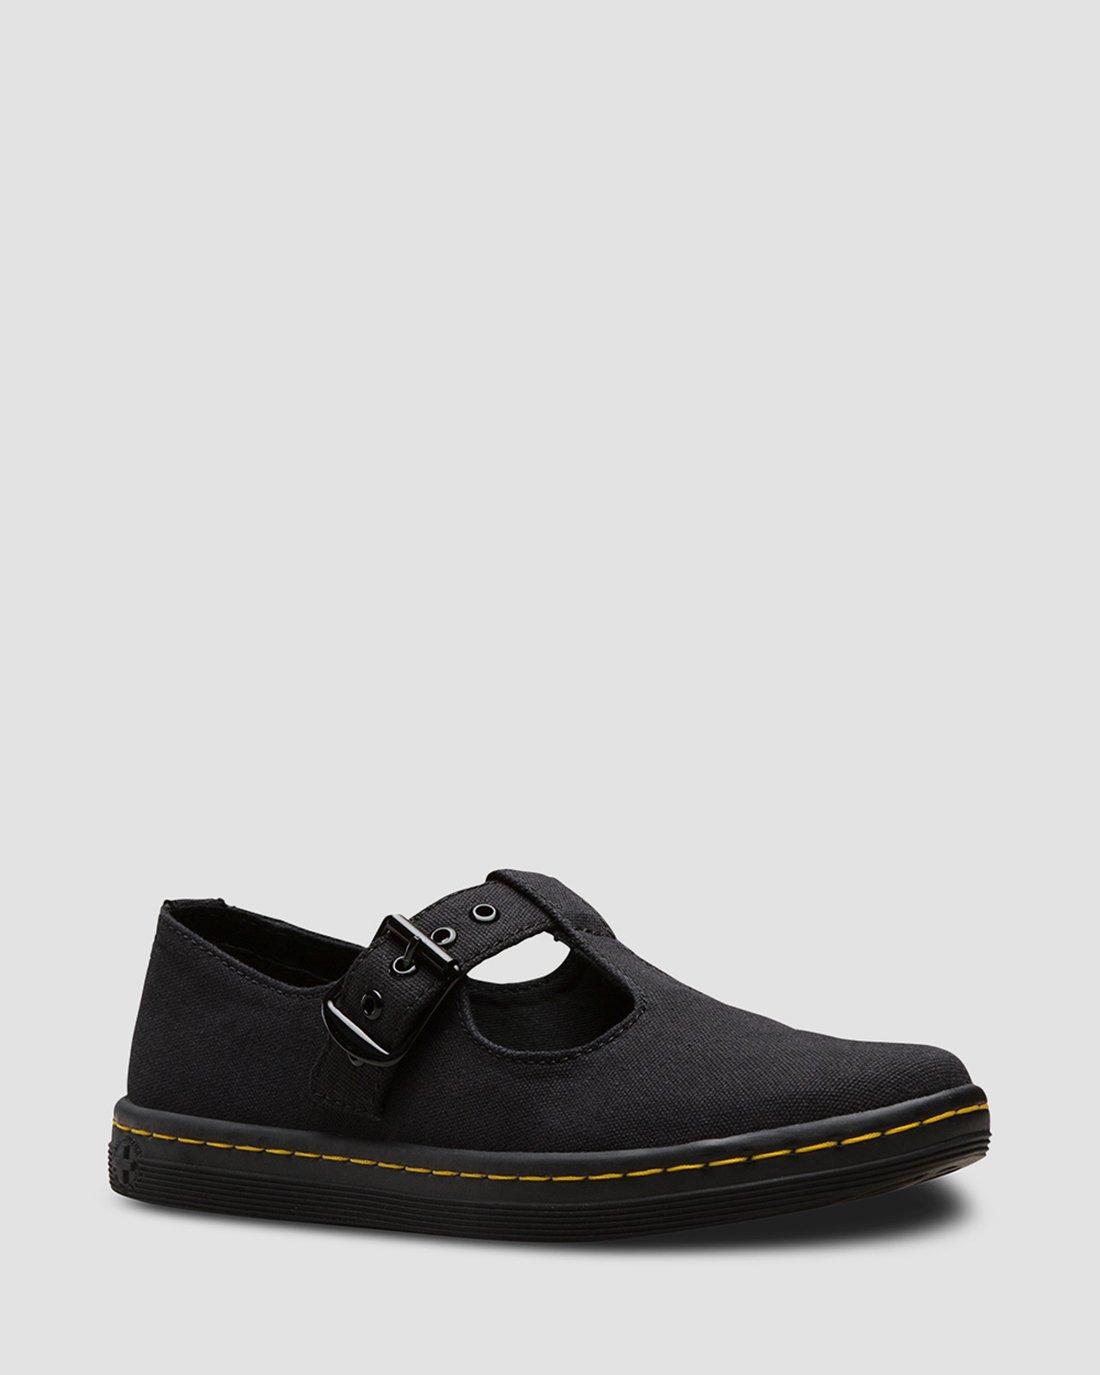 WOOLWICH CANVAS | Dr. Martens